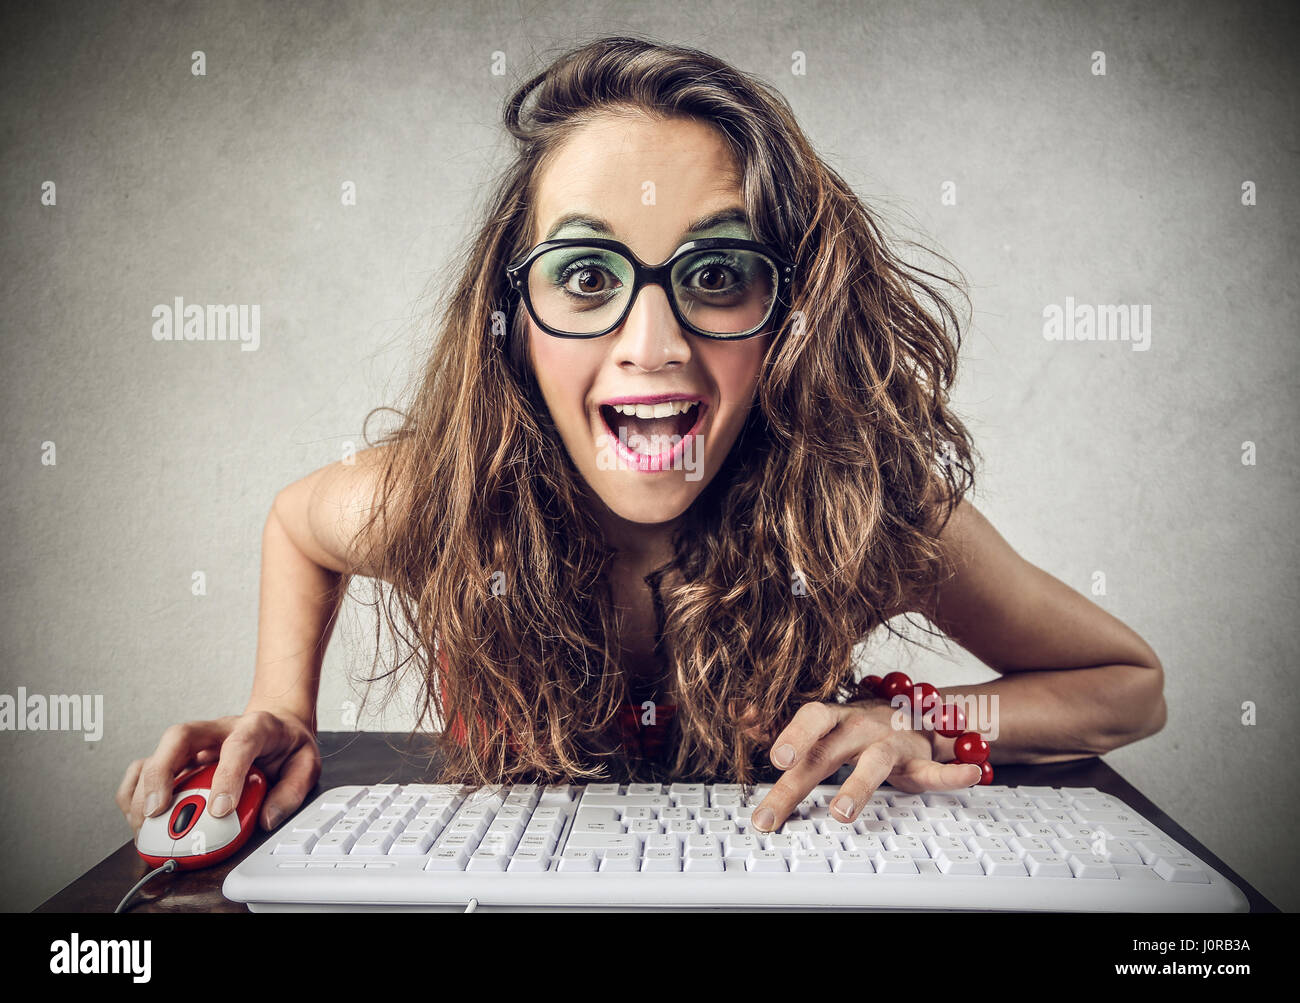 Brunette woman being excited in front of computer Stock Photo